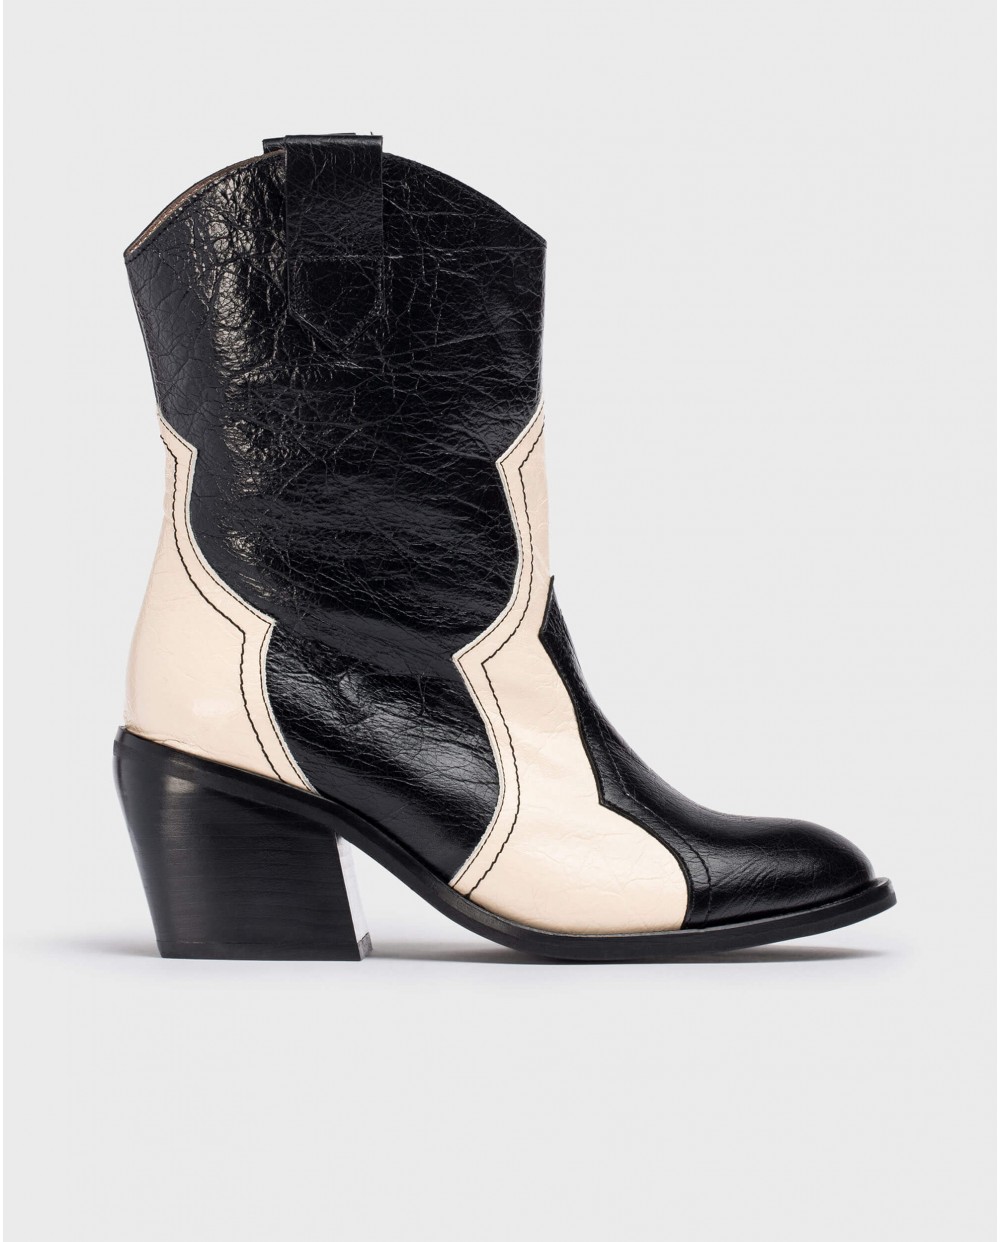 Wonders-Ankle Boots-Black COTA ankle boot